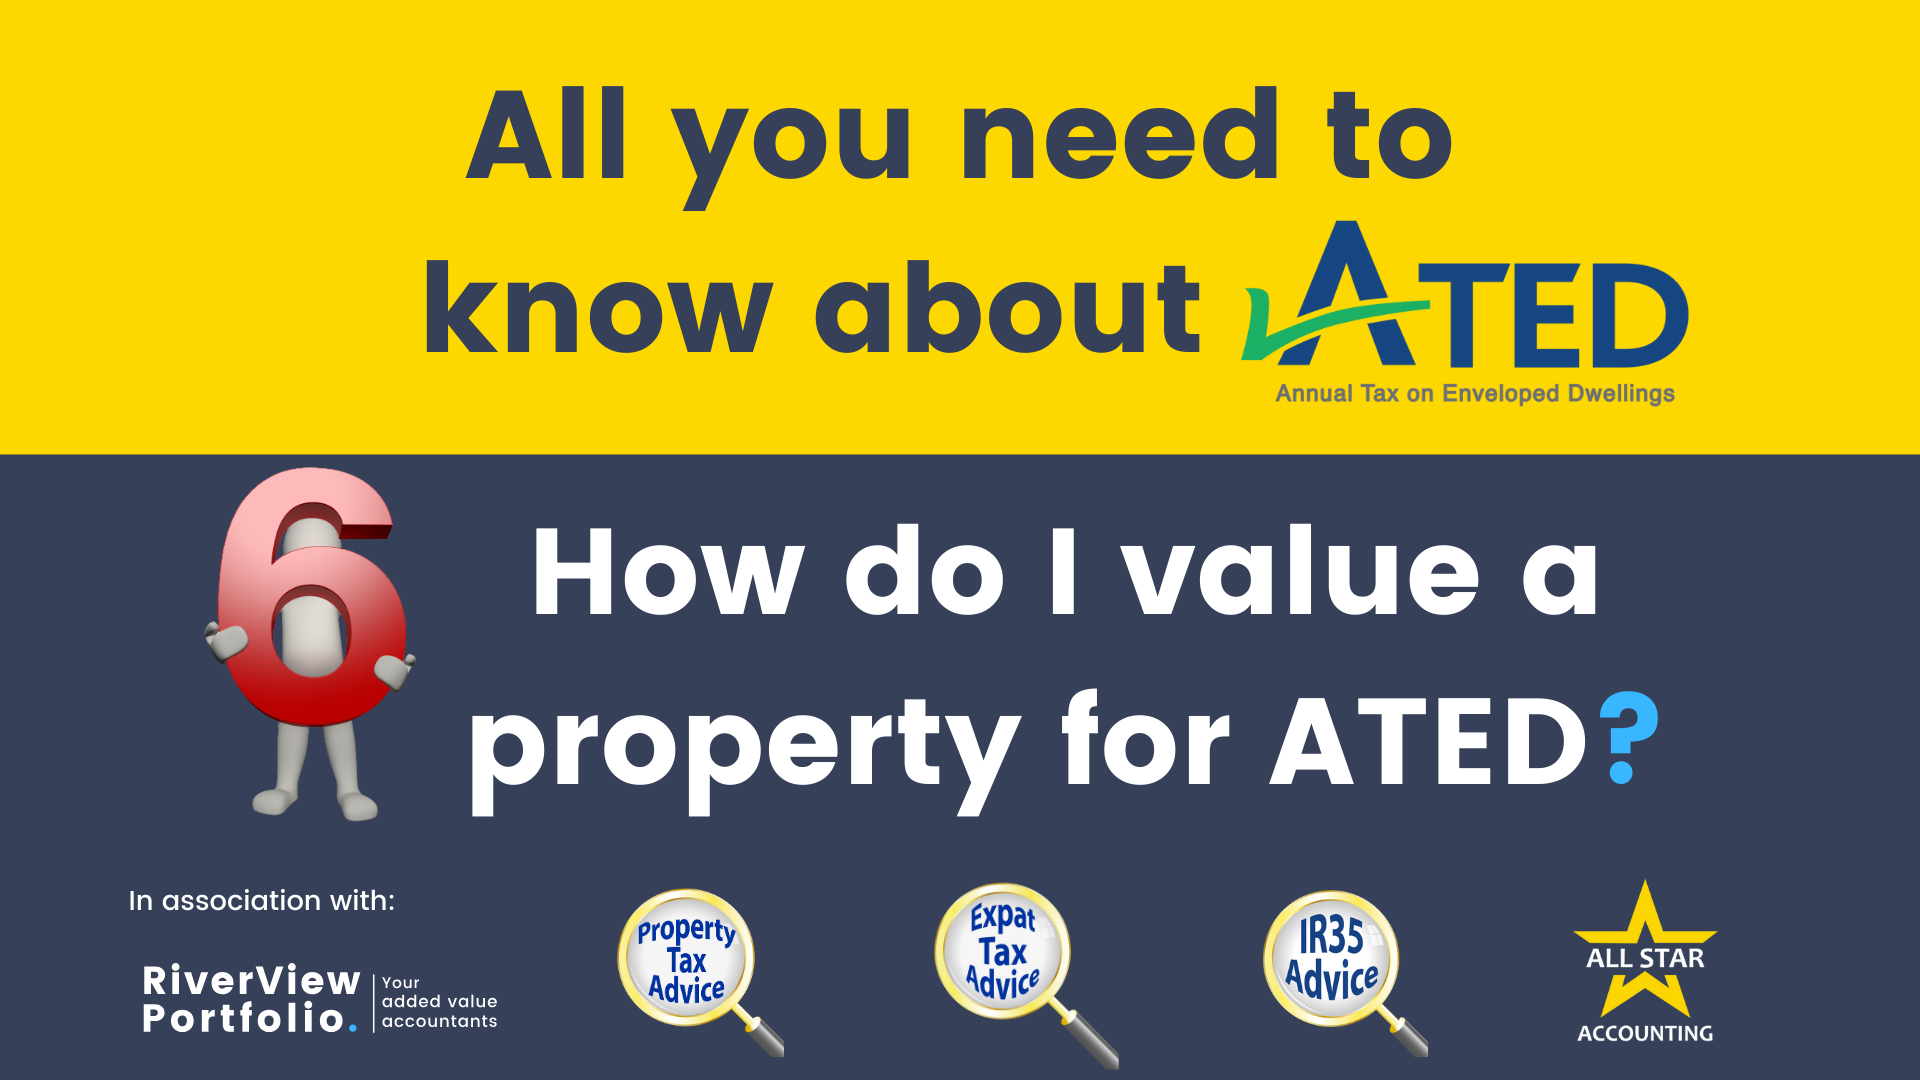 ated, annual tax on envelope dwellings, ated property value